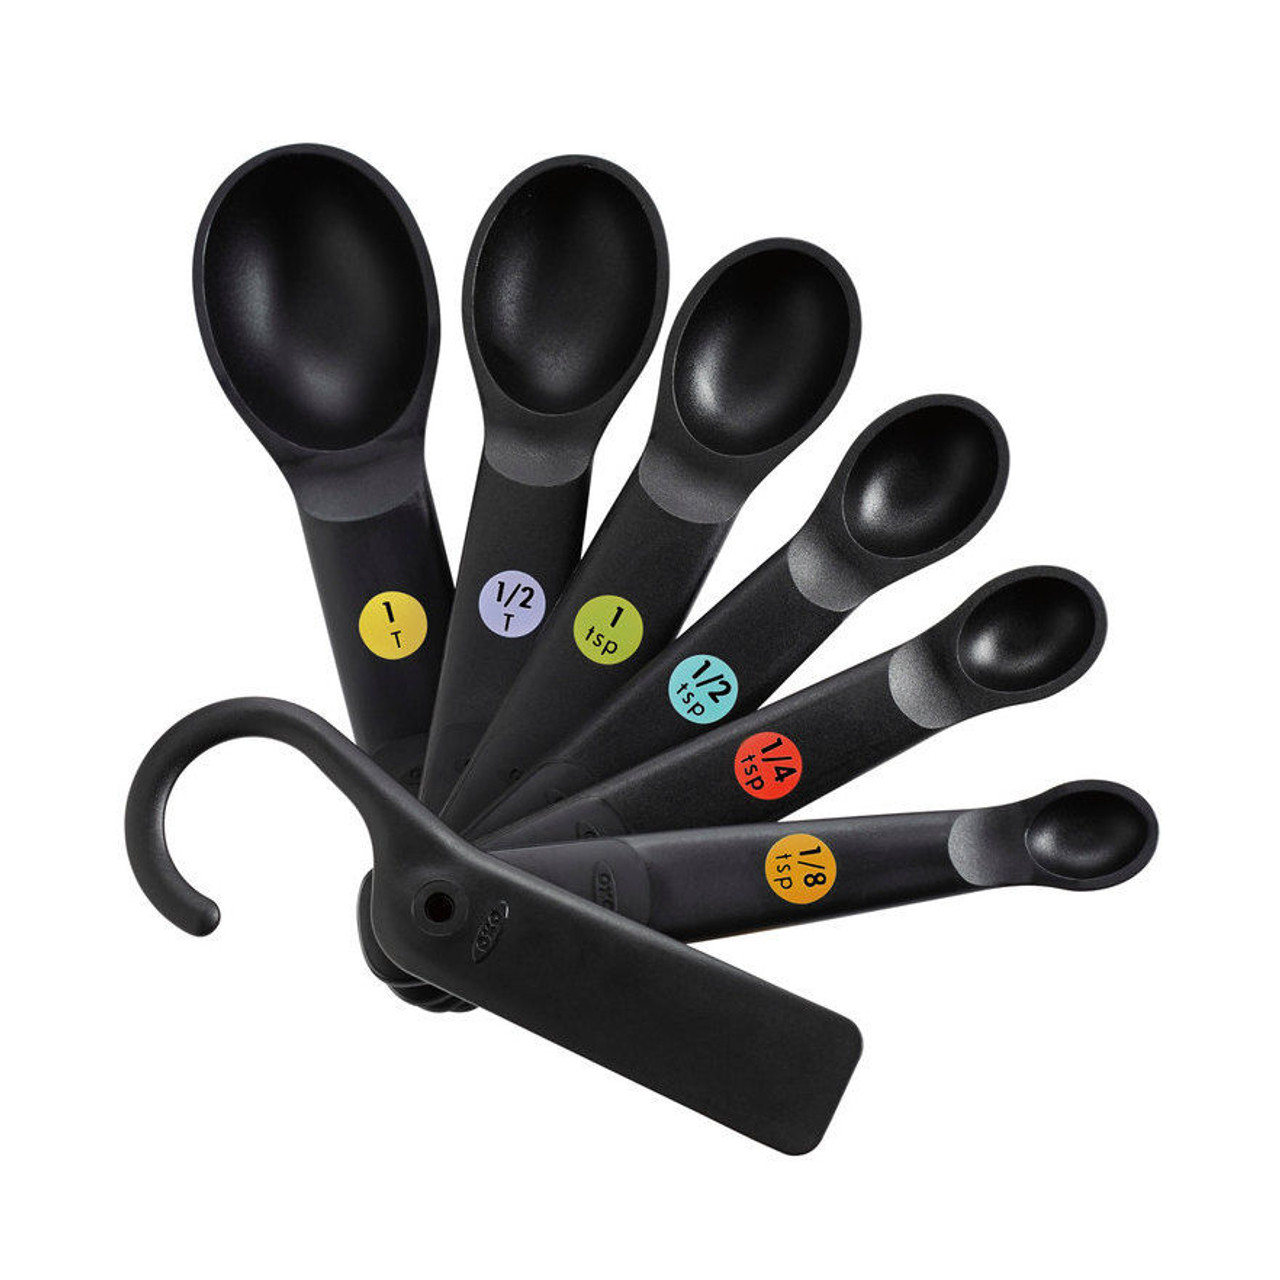 OXO Good Grips Non-Slip Spoon Rest with Lid Holder